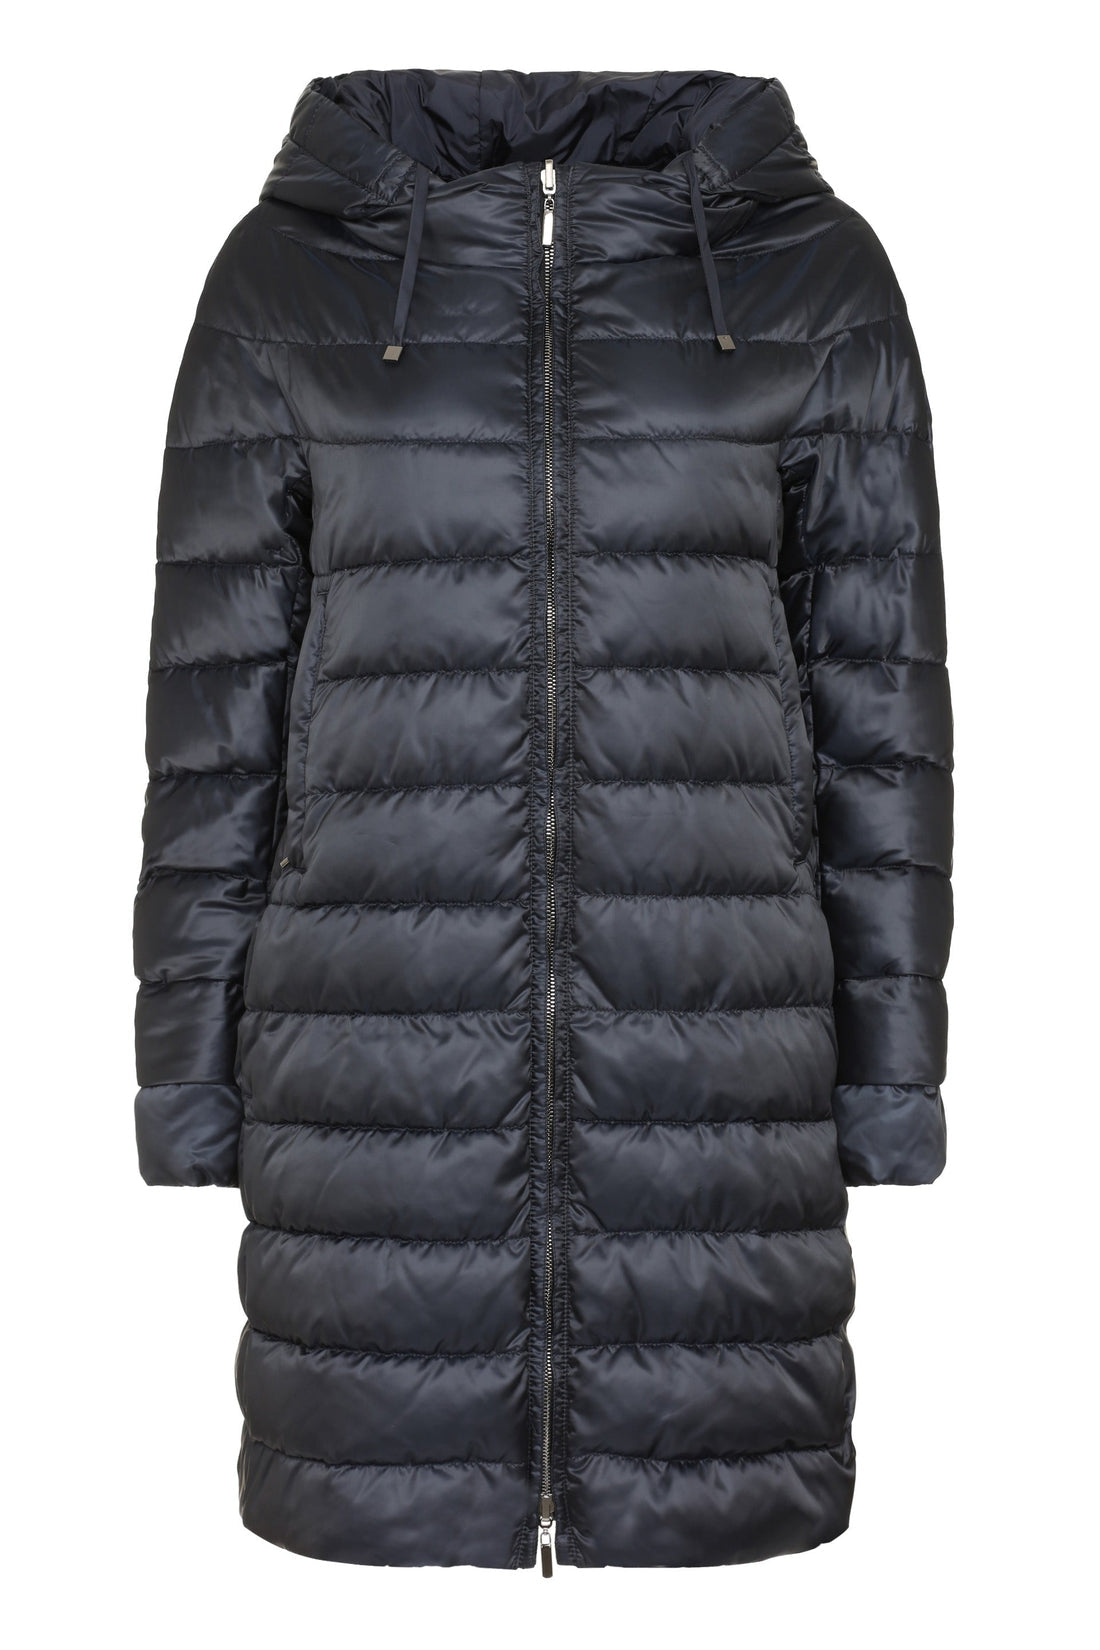 Max Mara-OUTLET-SALE-Noveca hooded down jacket-ARCHIVIST